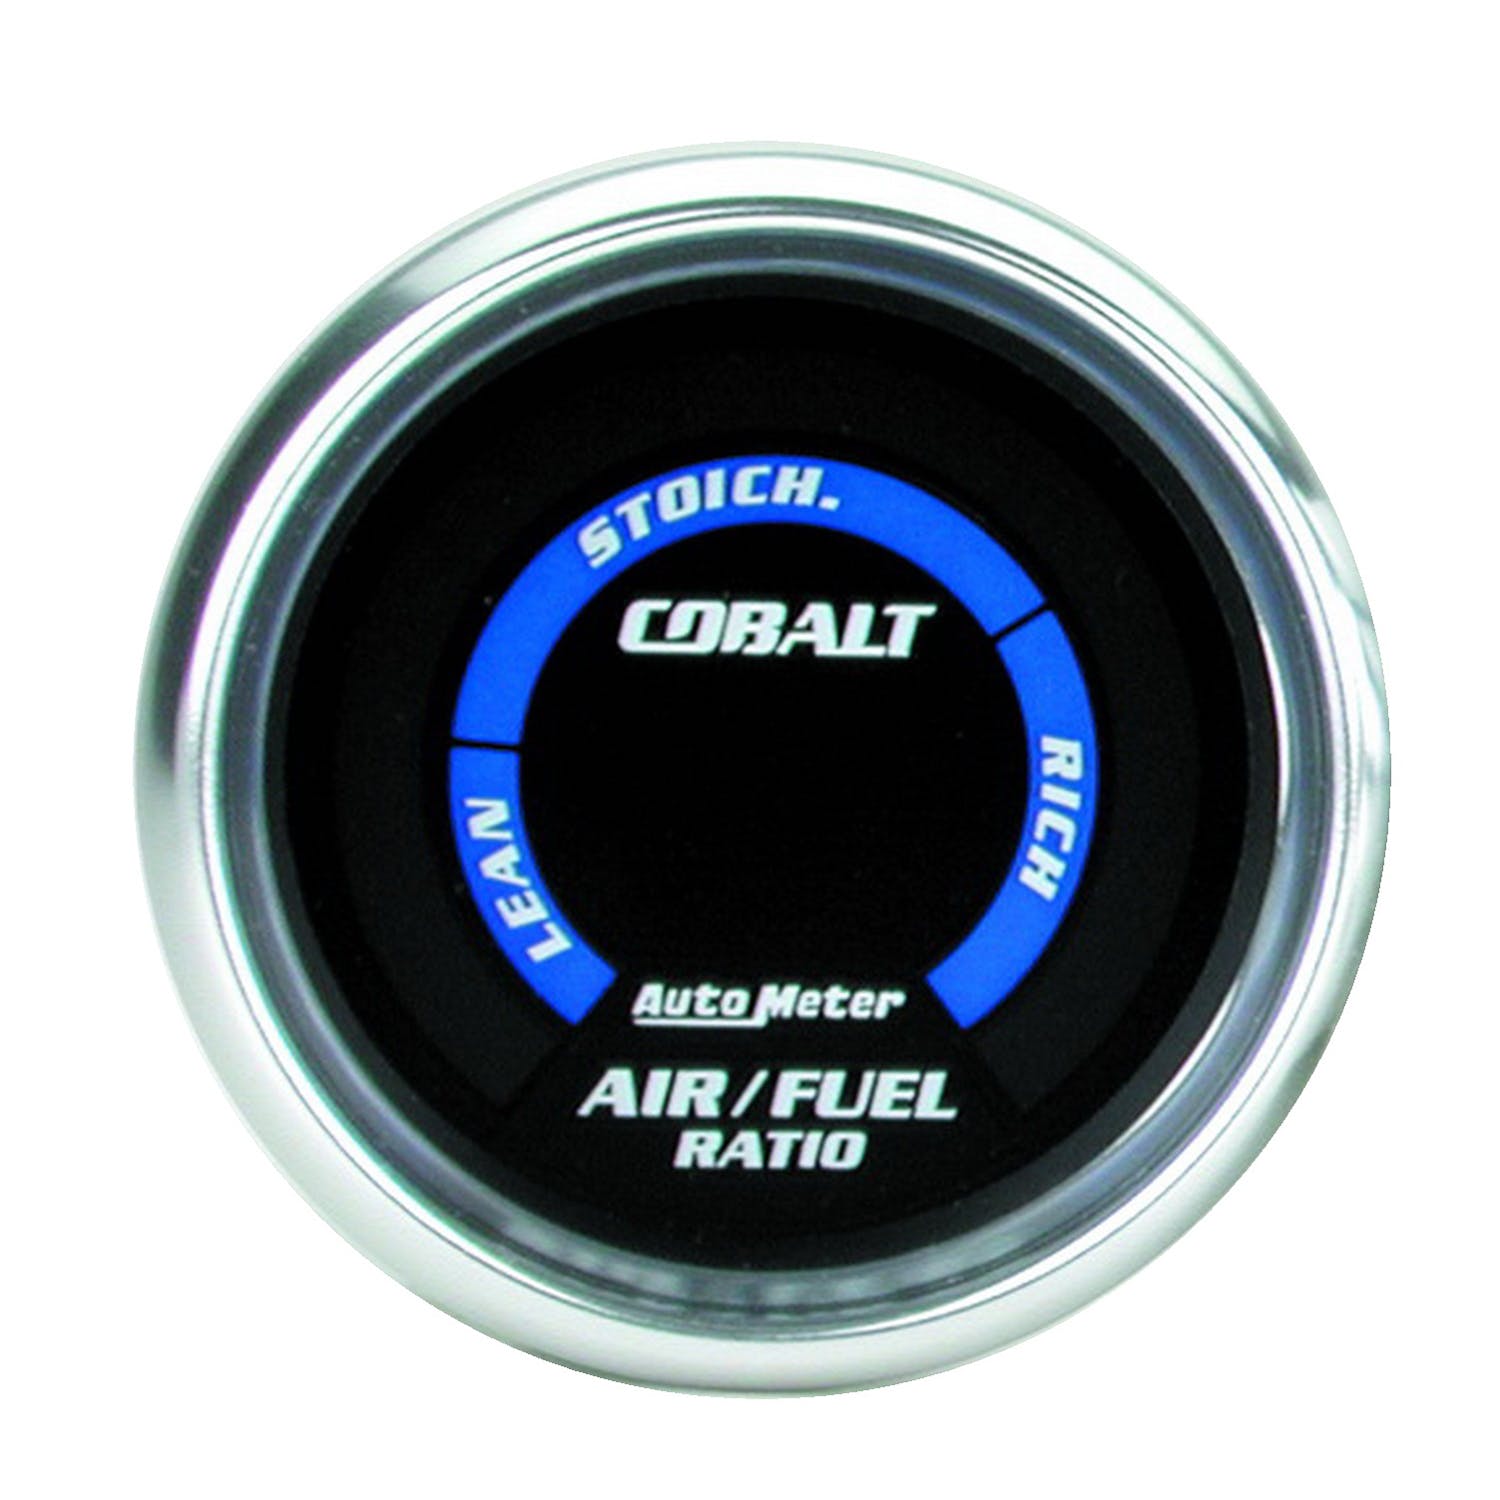 AutoMeter Products 6175 Air/Fuel Ratio